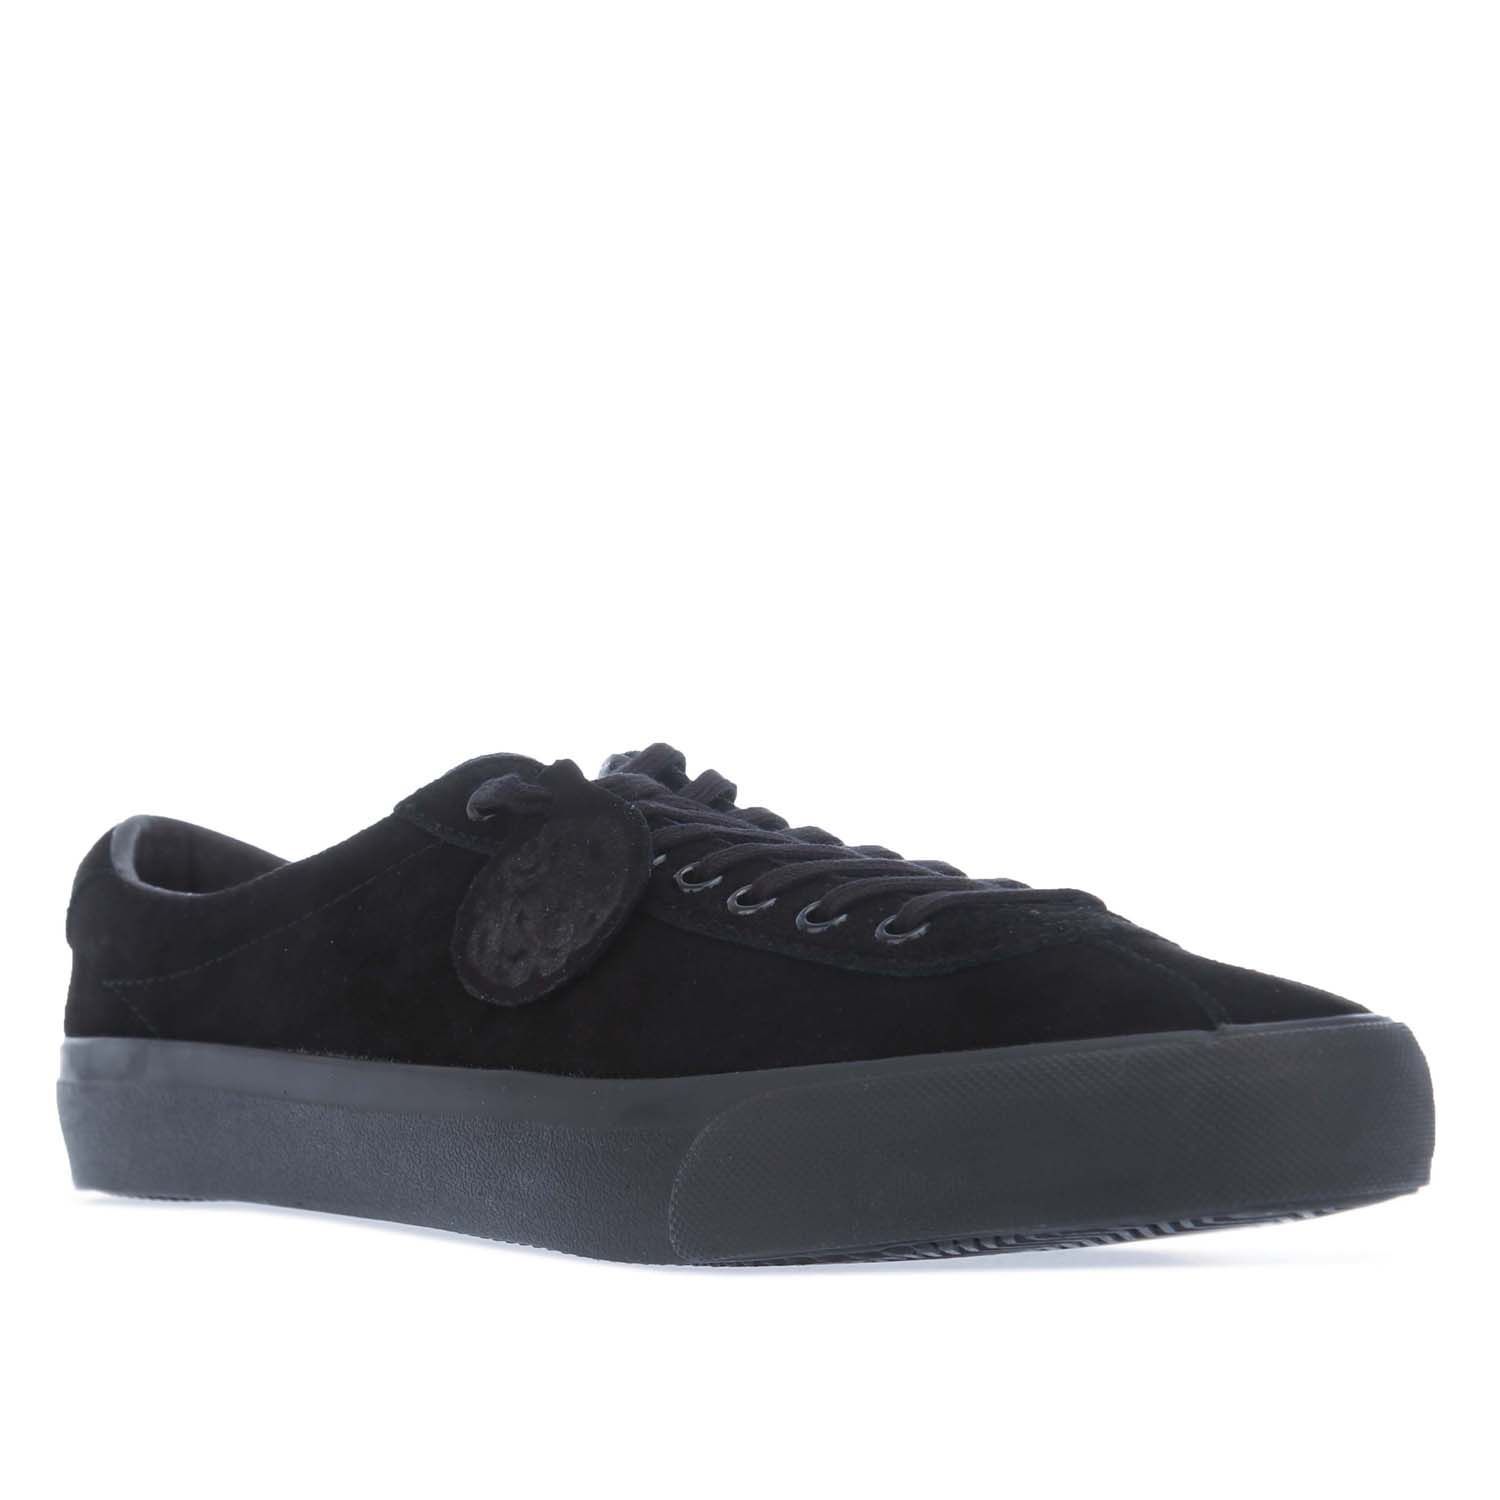 Mens Pretty Green Suede Trainers in black.- Soft suede upper.- Lace up with tonal metalliv eyelets.- Panelled round toes.- Tonal stitching.- Internal branding on the sole.- Gold-tone branding.- Solid rubber sole.- Leather and Suede upper  Leather lining  Synthetic sole.- Ref: S20MU30000156B